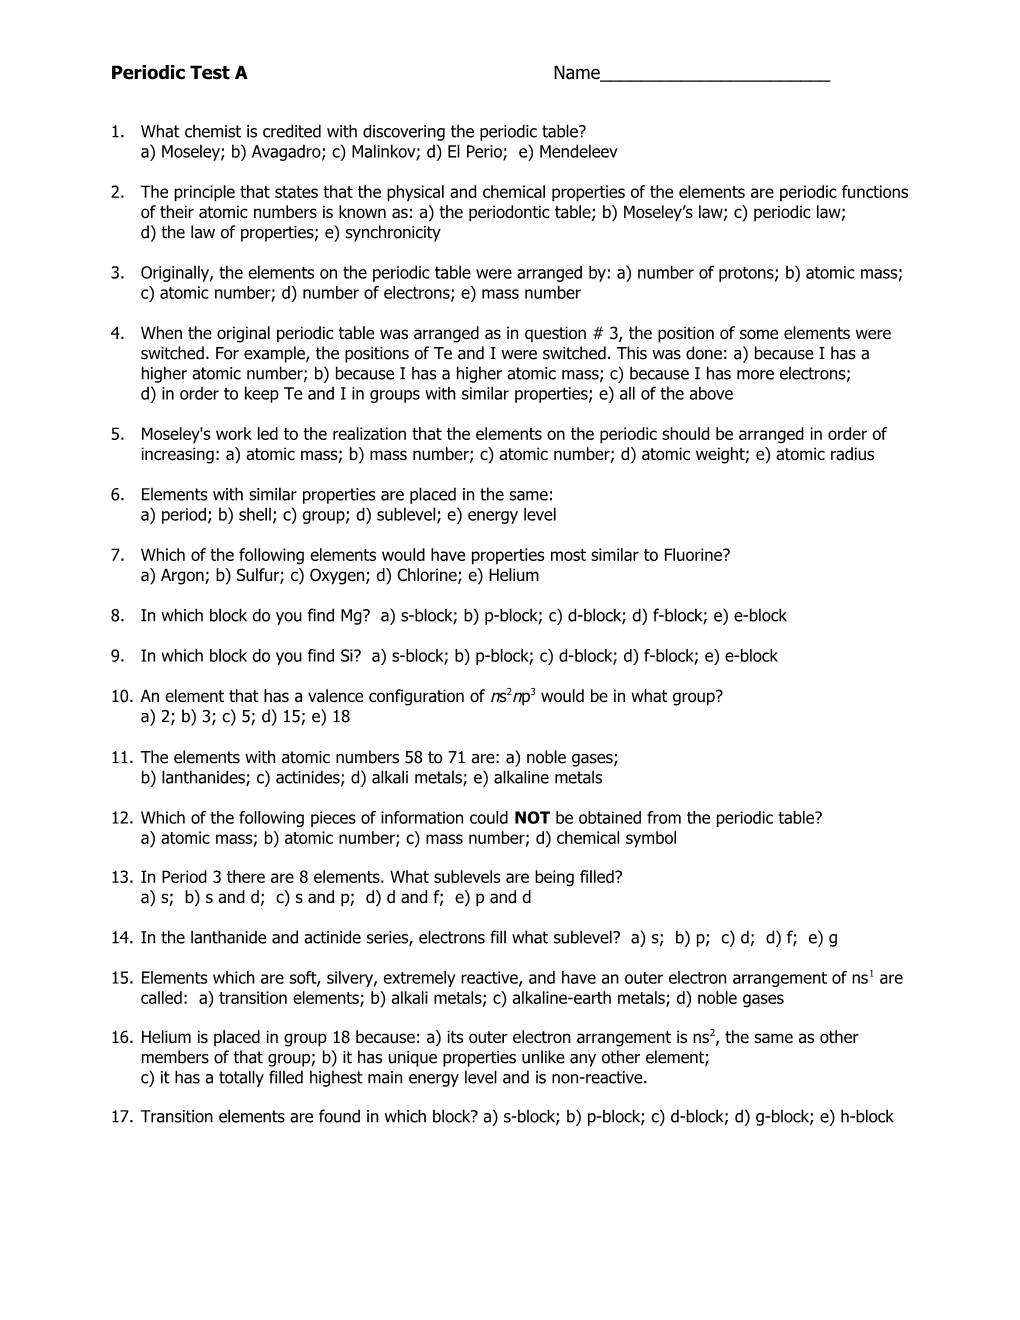 Periodic Test a Page 3